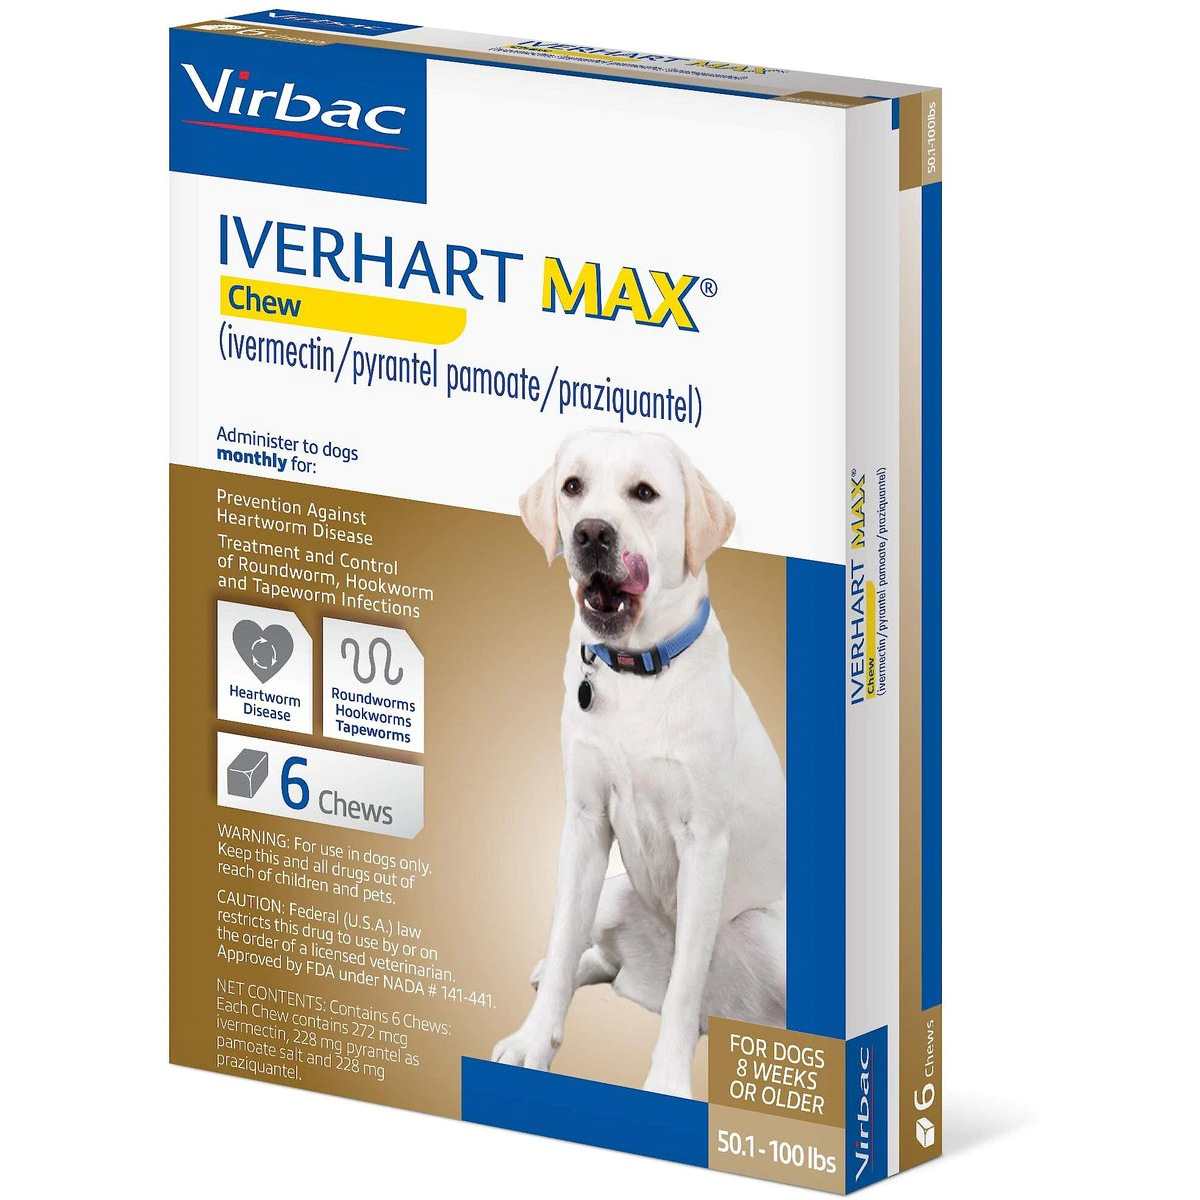 Iverhart Max Chew for Dogs